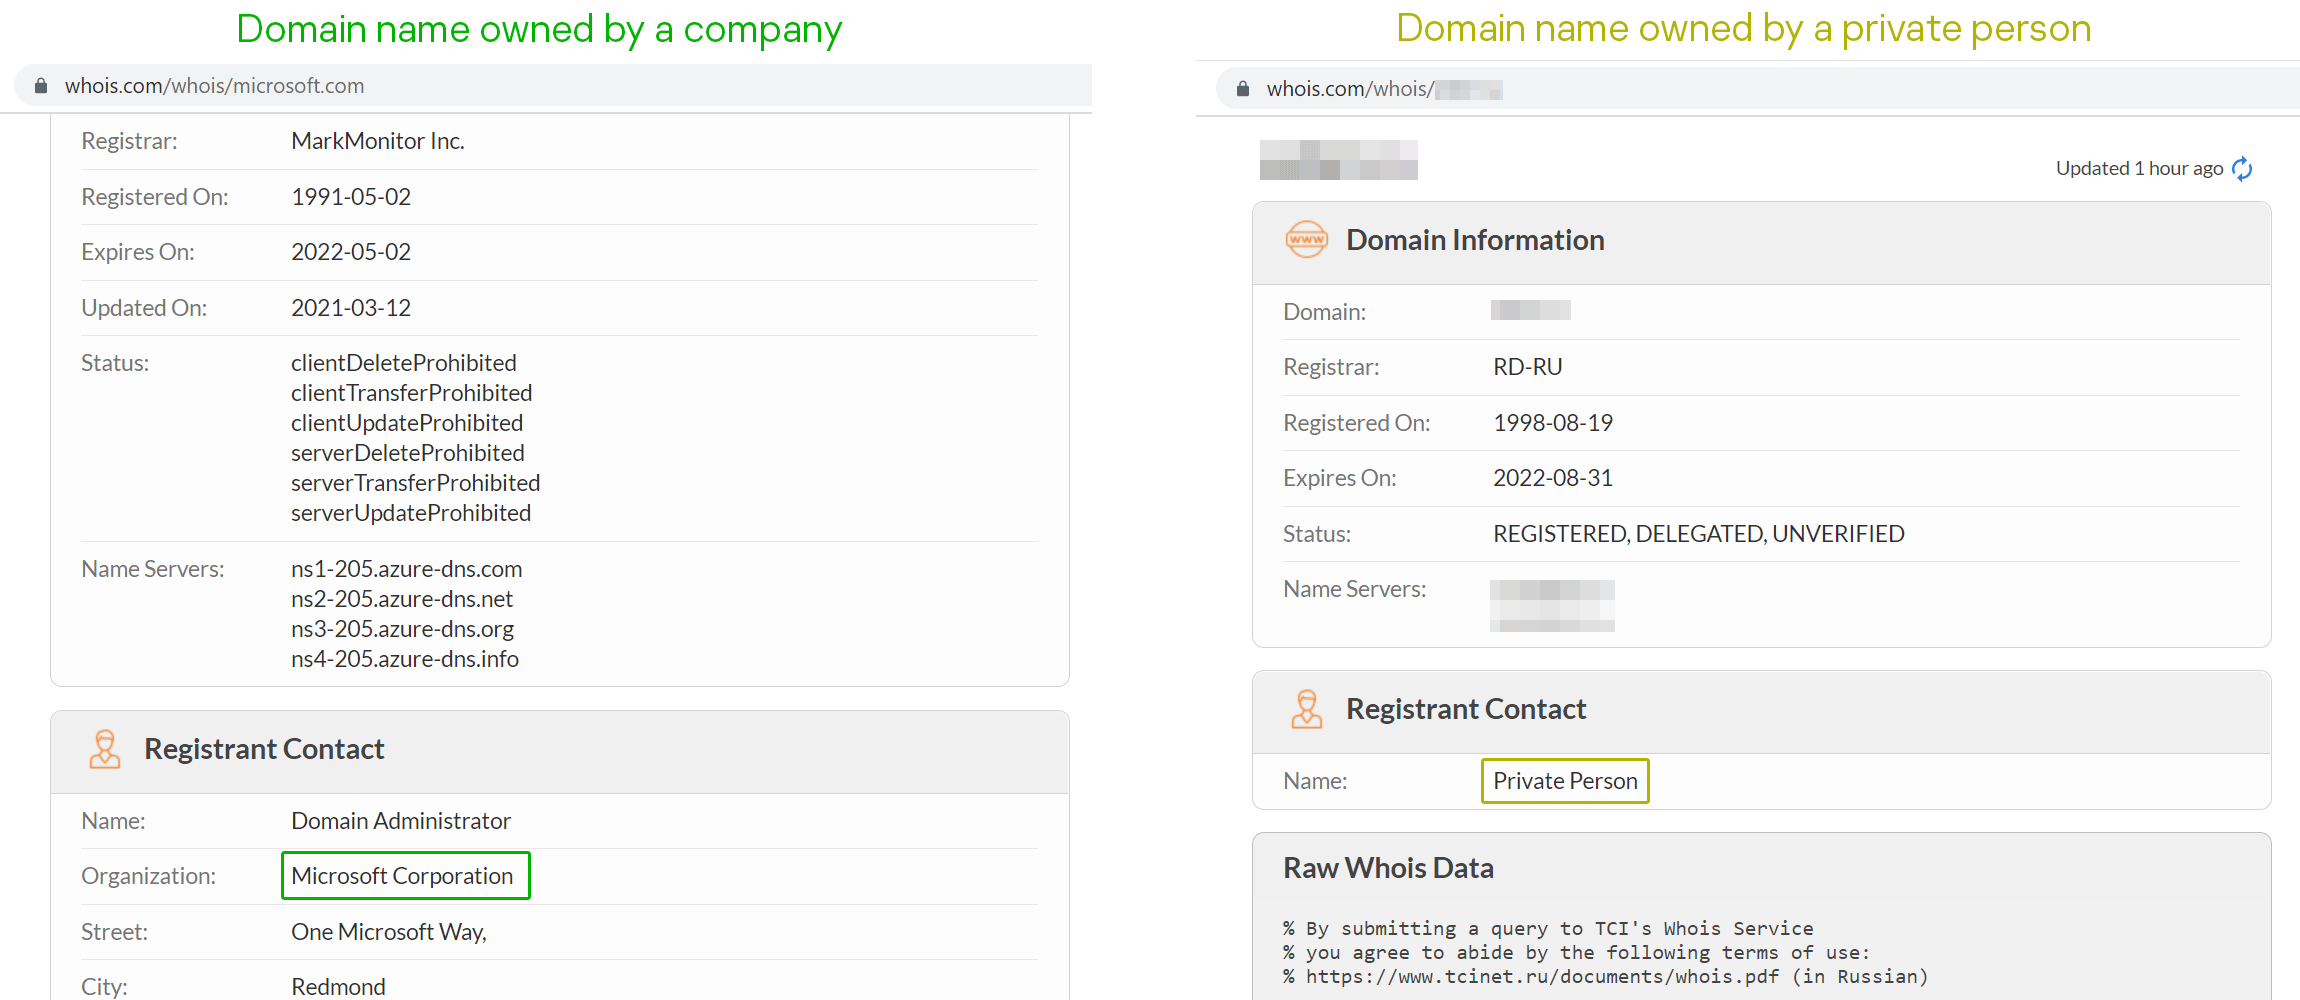 Difference in Whois between corporate and private domains